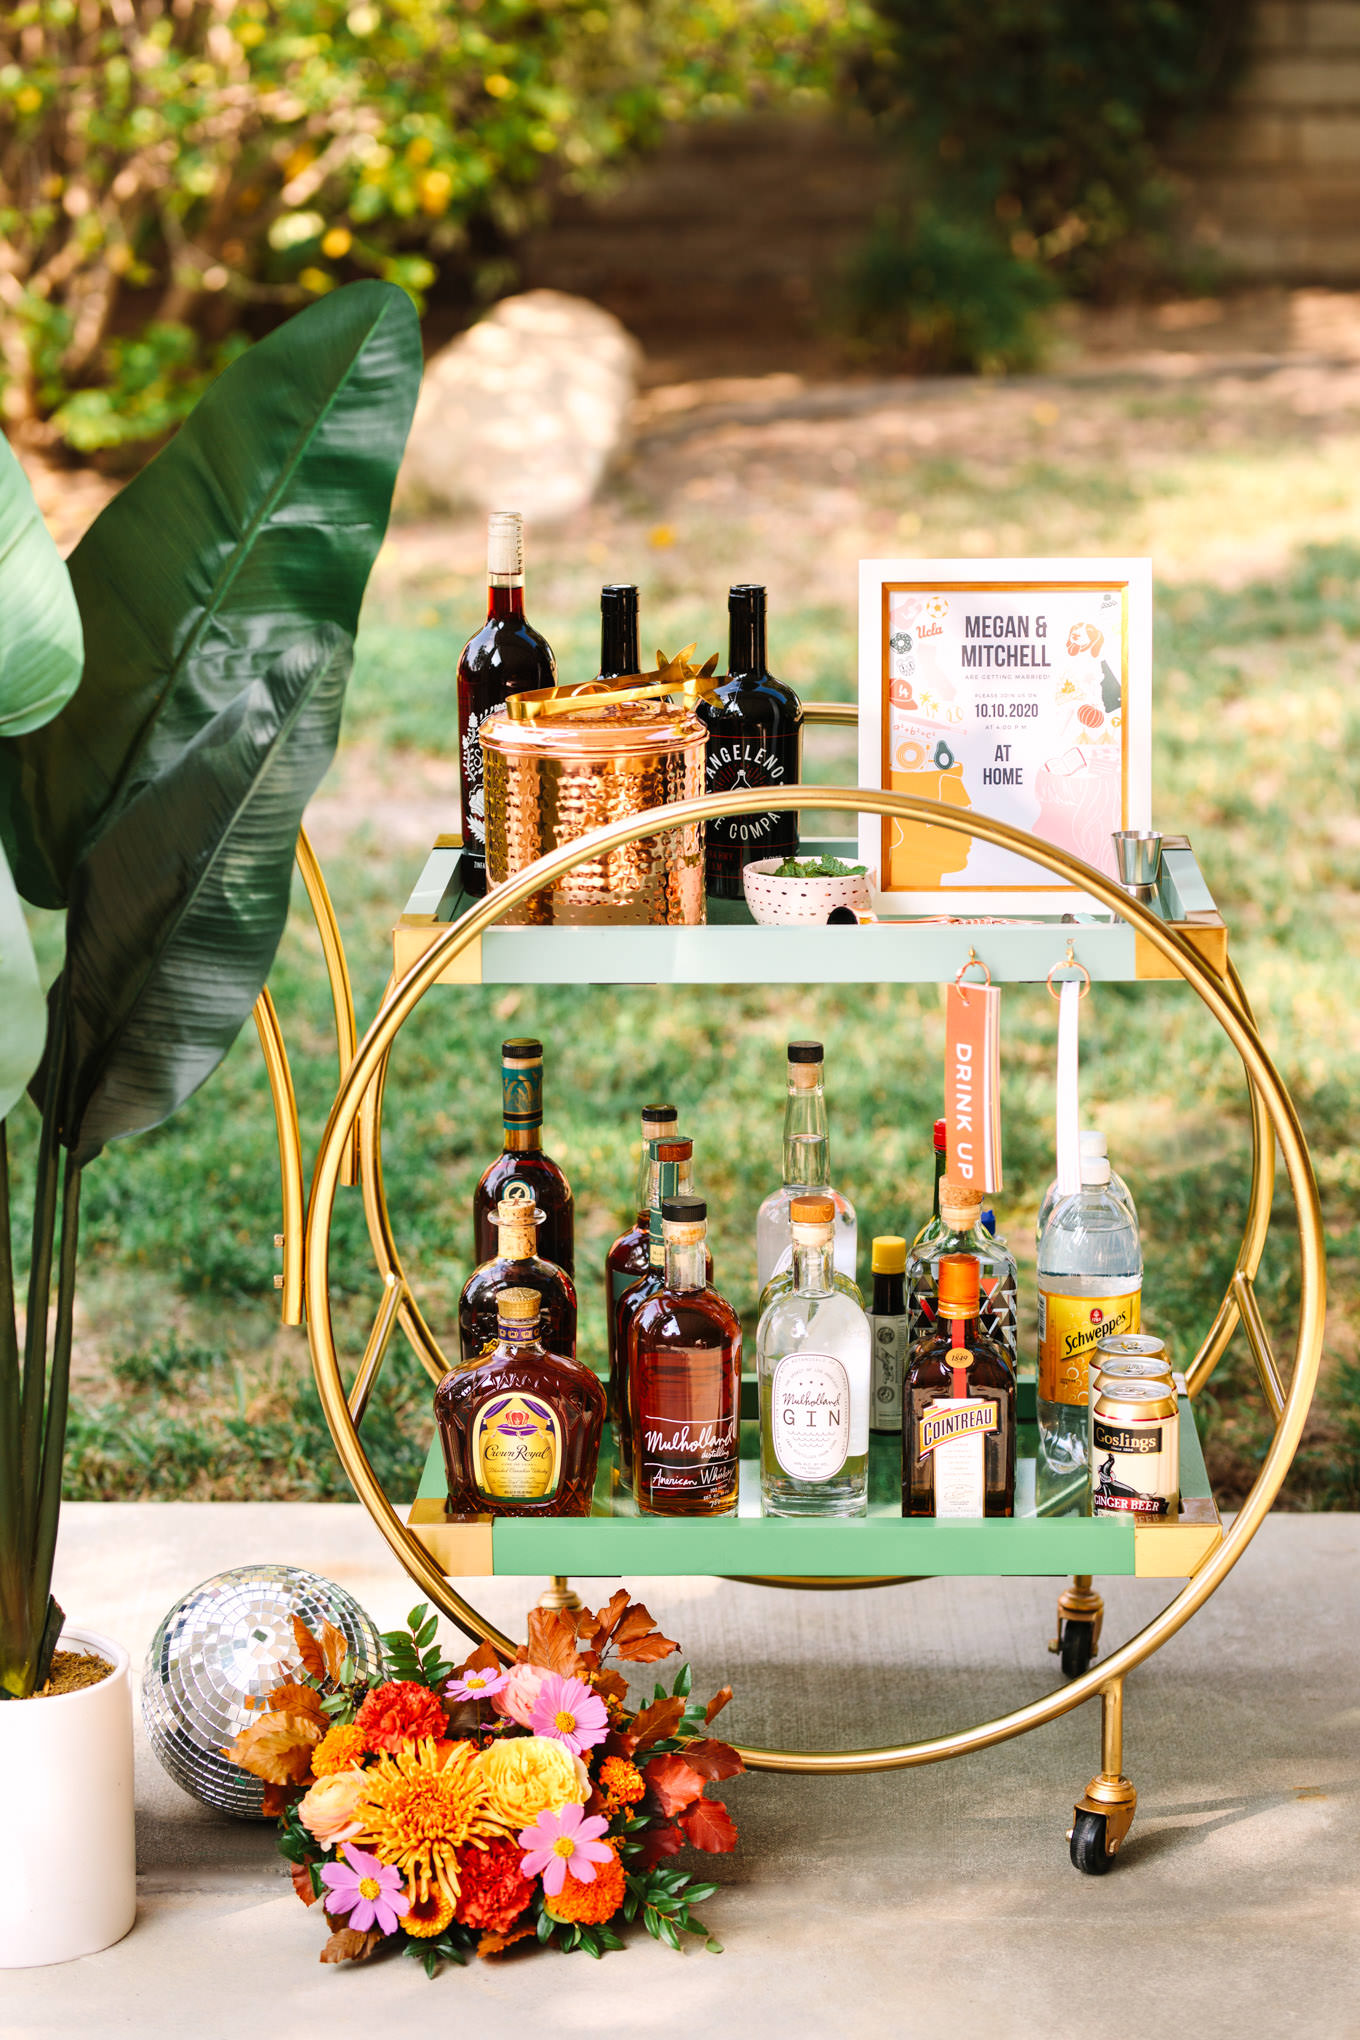 Bar cart with disco ball for backyard wedding | Engagement, elopement, and wedding photography roundup of Mary Costa’s favorite images from 2020 | Colorful and elevated photography for fun-loving couples in Southern California | #2020wedding #elopement #weddingphoto #weddingphotography #microwedding   Source: Mary Costa Photography | Los Angeles